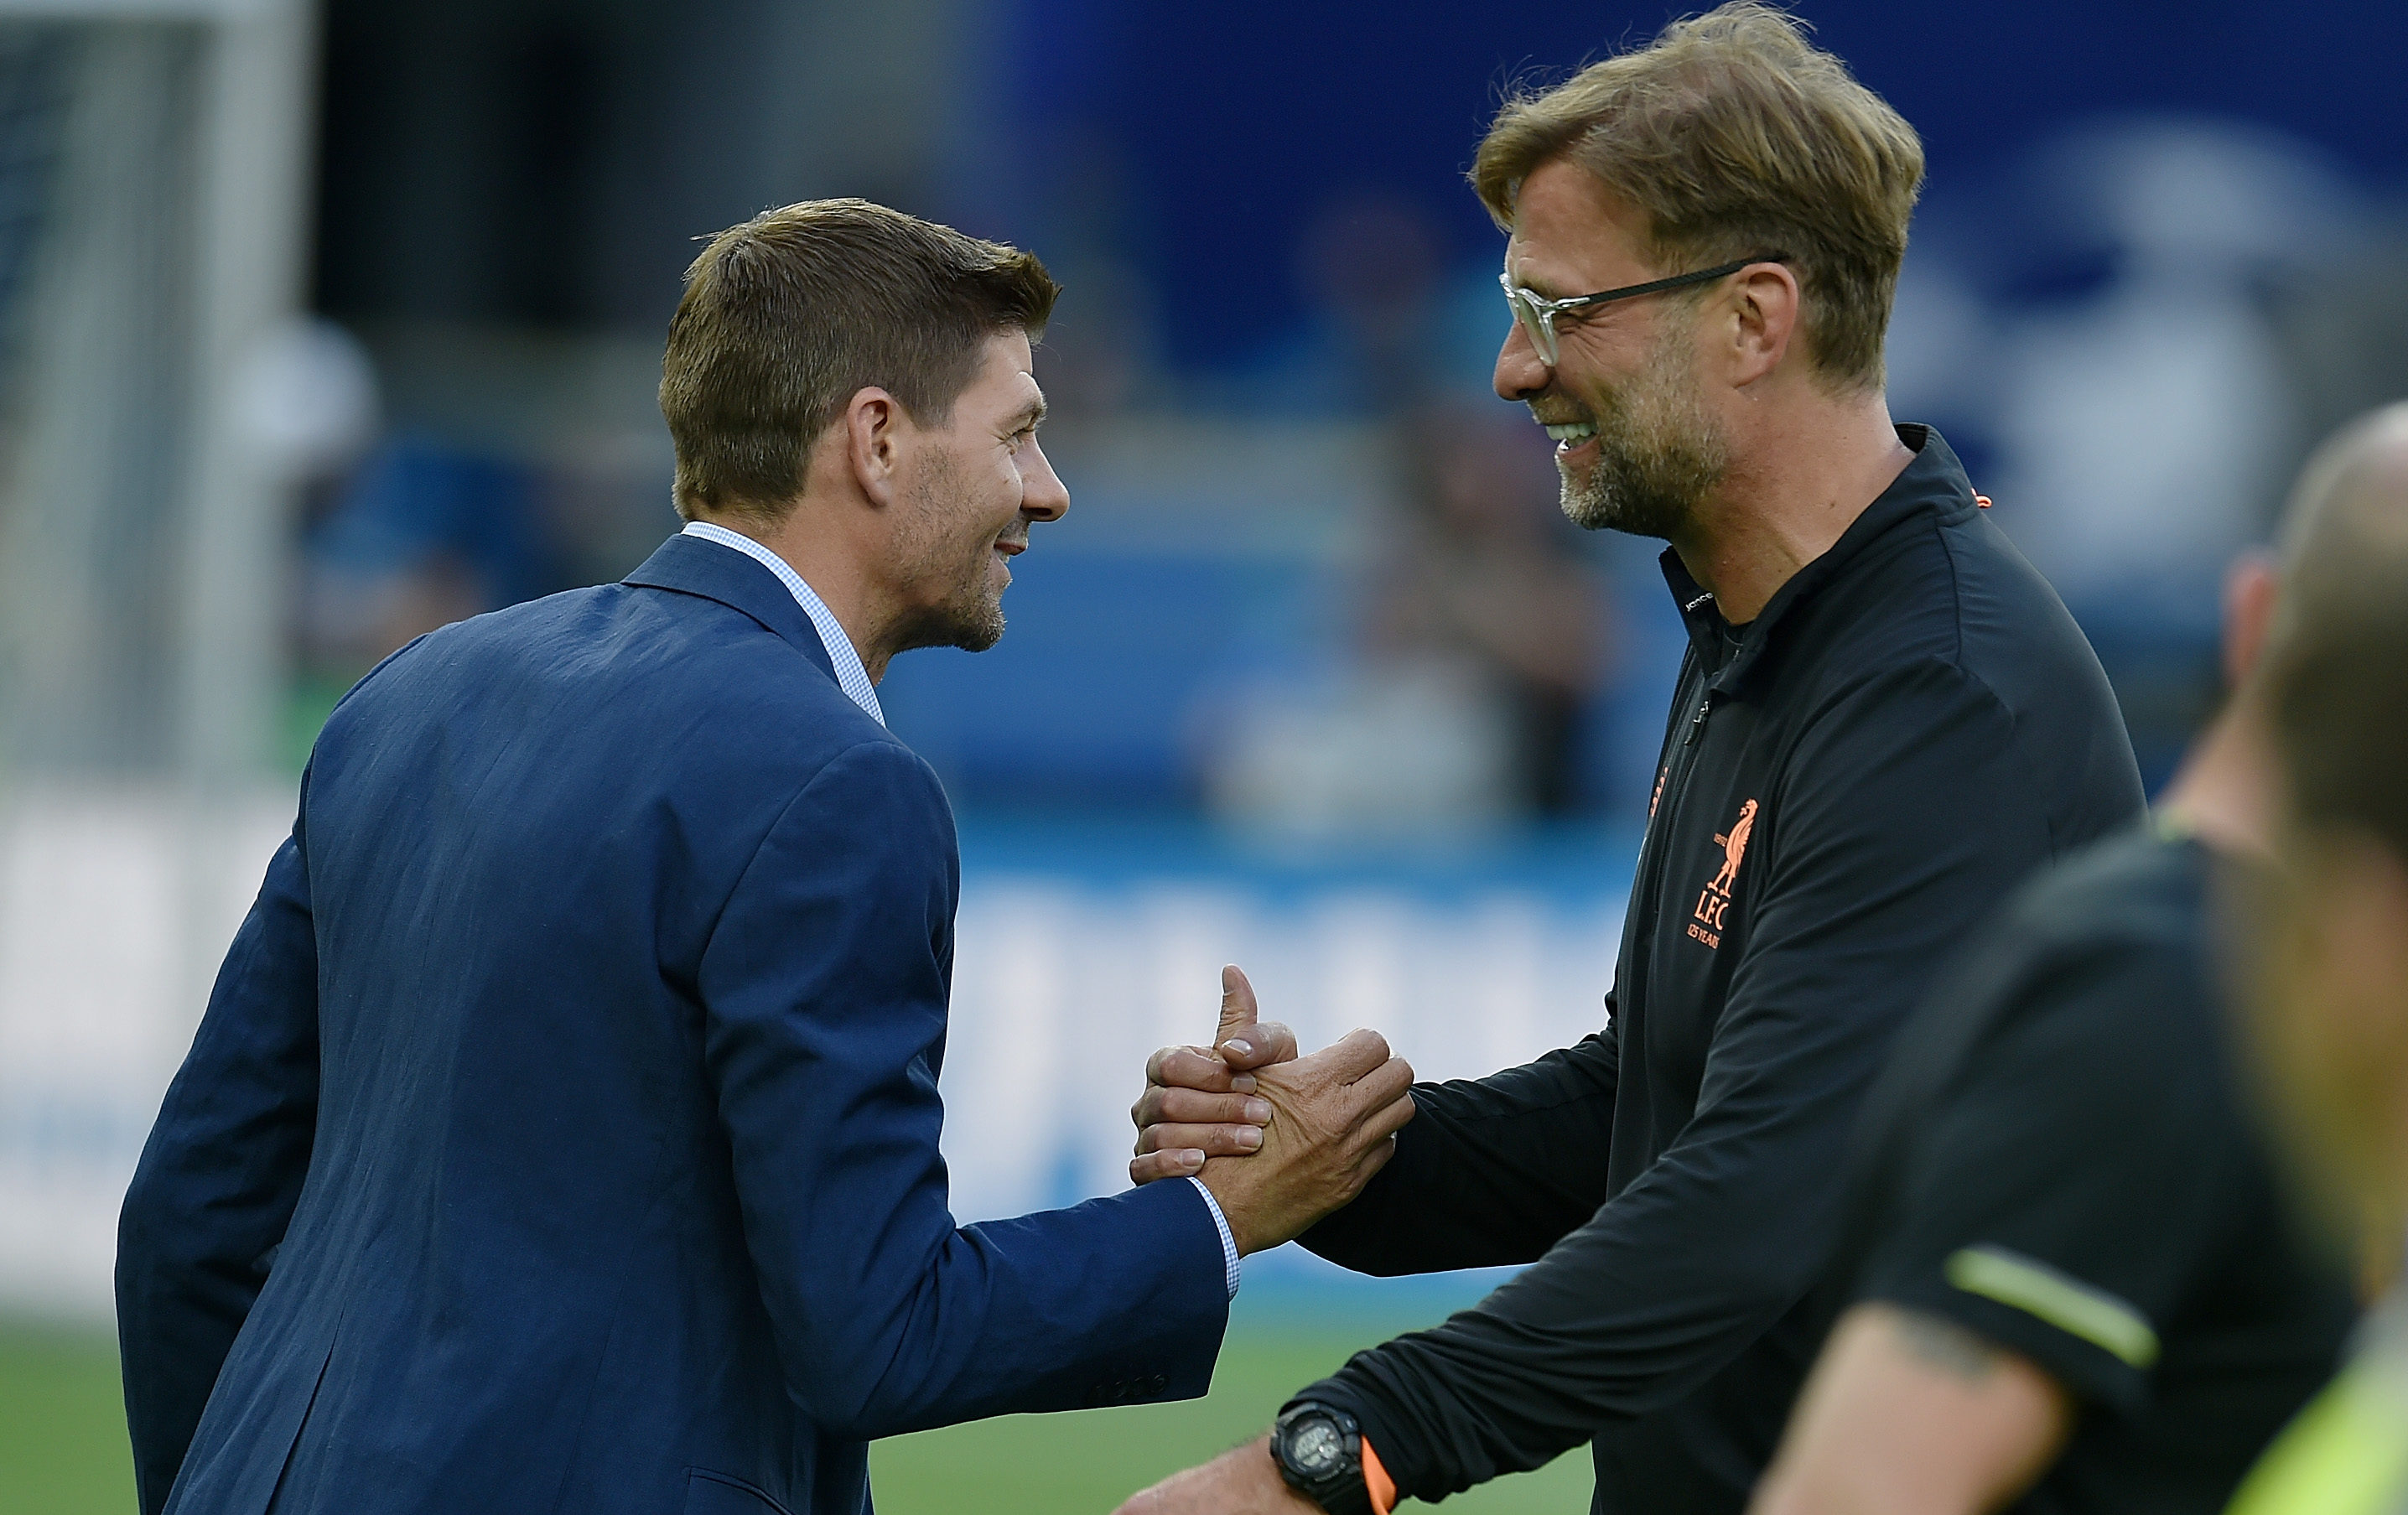 Steven Gerrard and Jurgen Klopp share mutual respect – and now the same length of contract